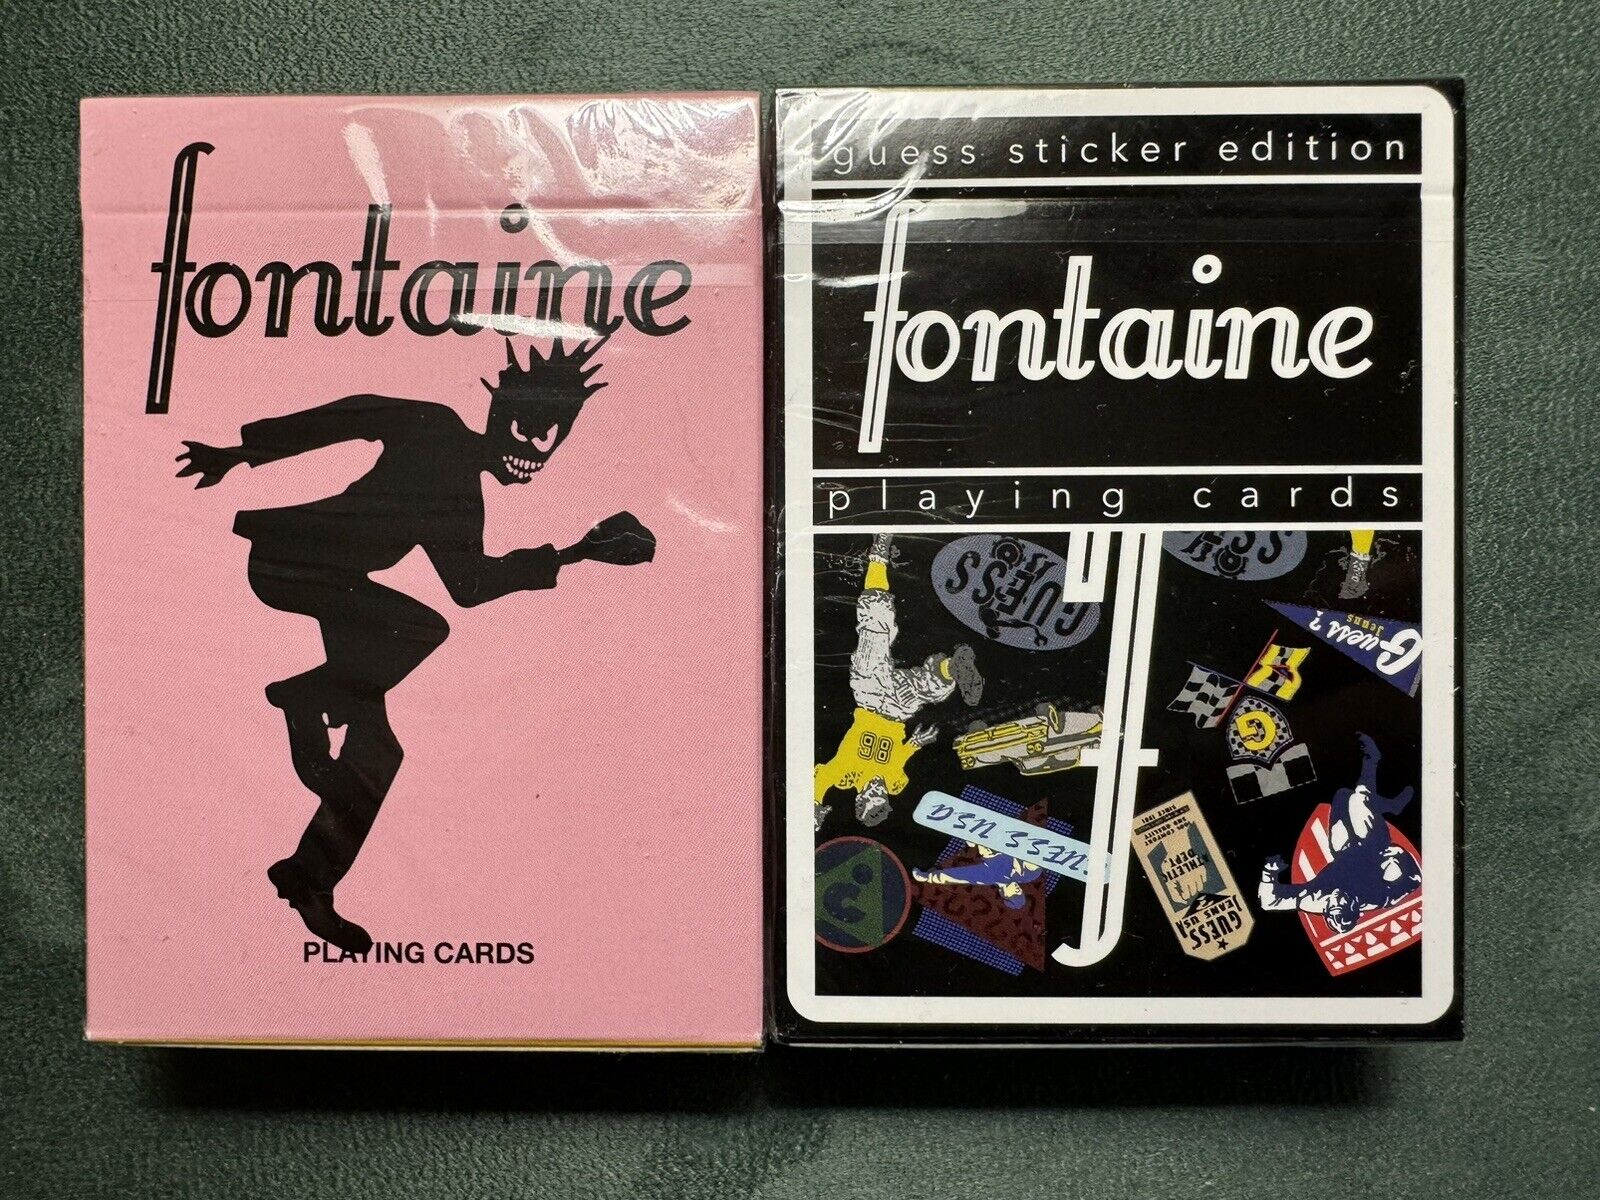 2 Decks Of Fontaine Playing Cards 1 Skank Ed. & 1 Guess Sticker Edition